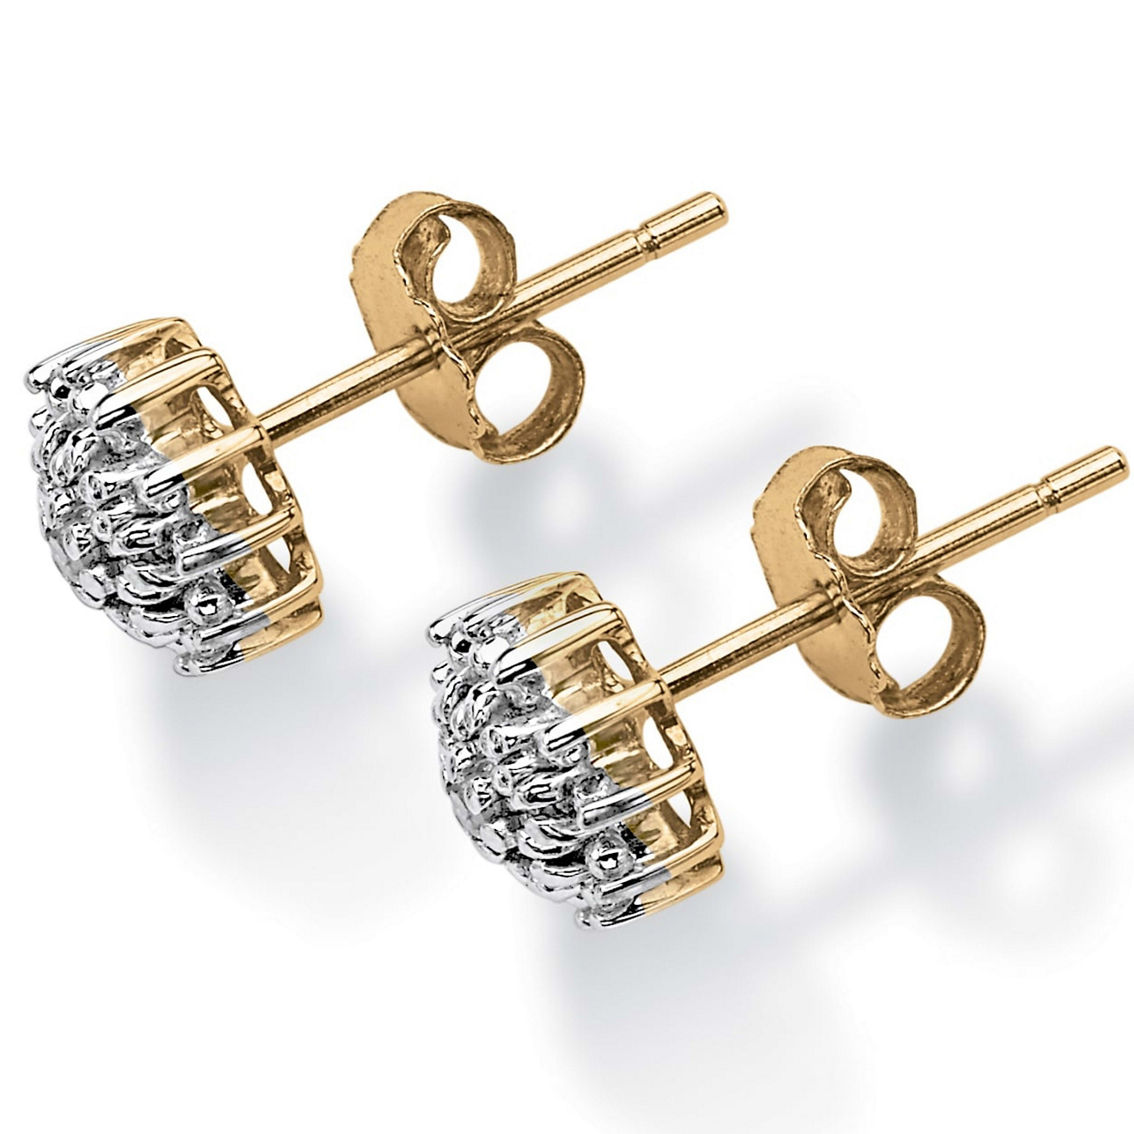 PalmBeach Diamond Accent Starburst Stud Earrings in Solid 10k Gold - Image 2 of 4